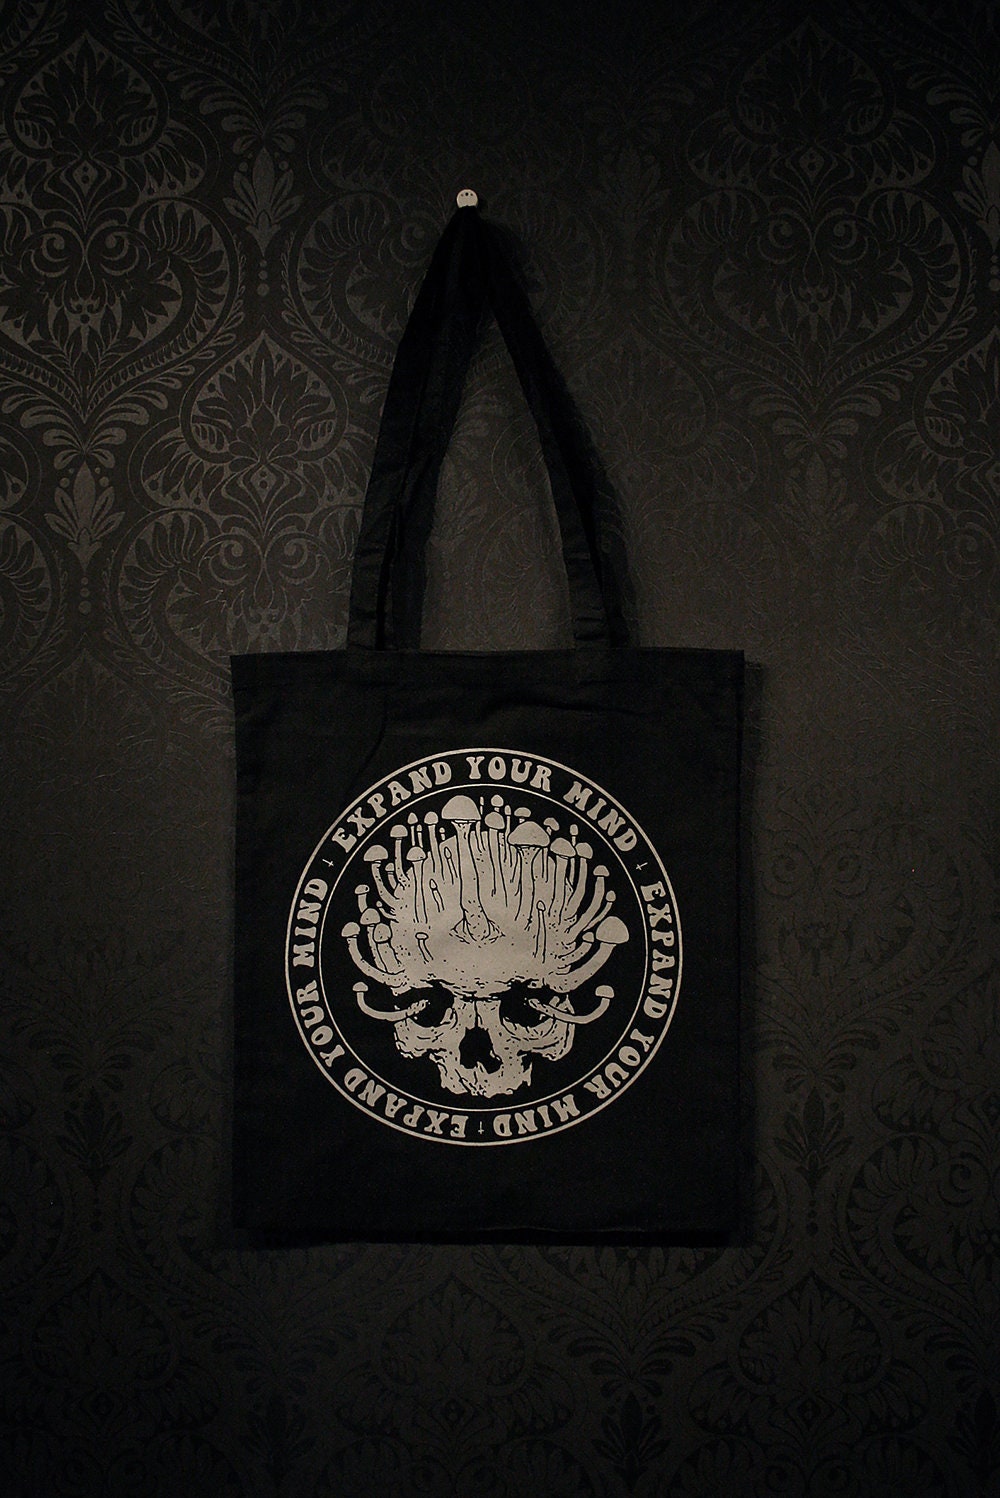 Expand your mind - Tote bag